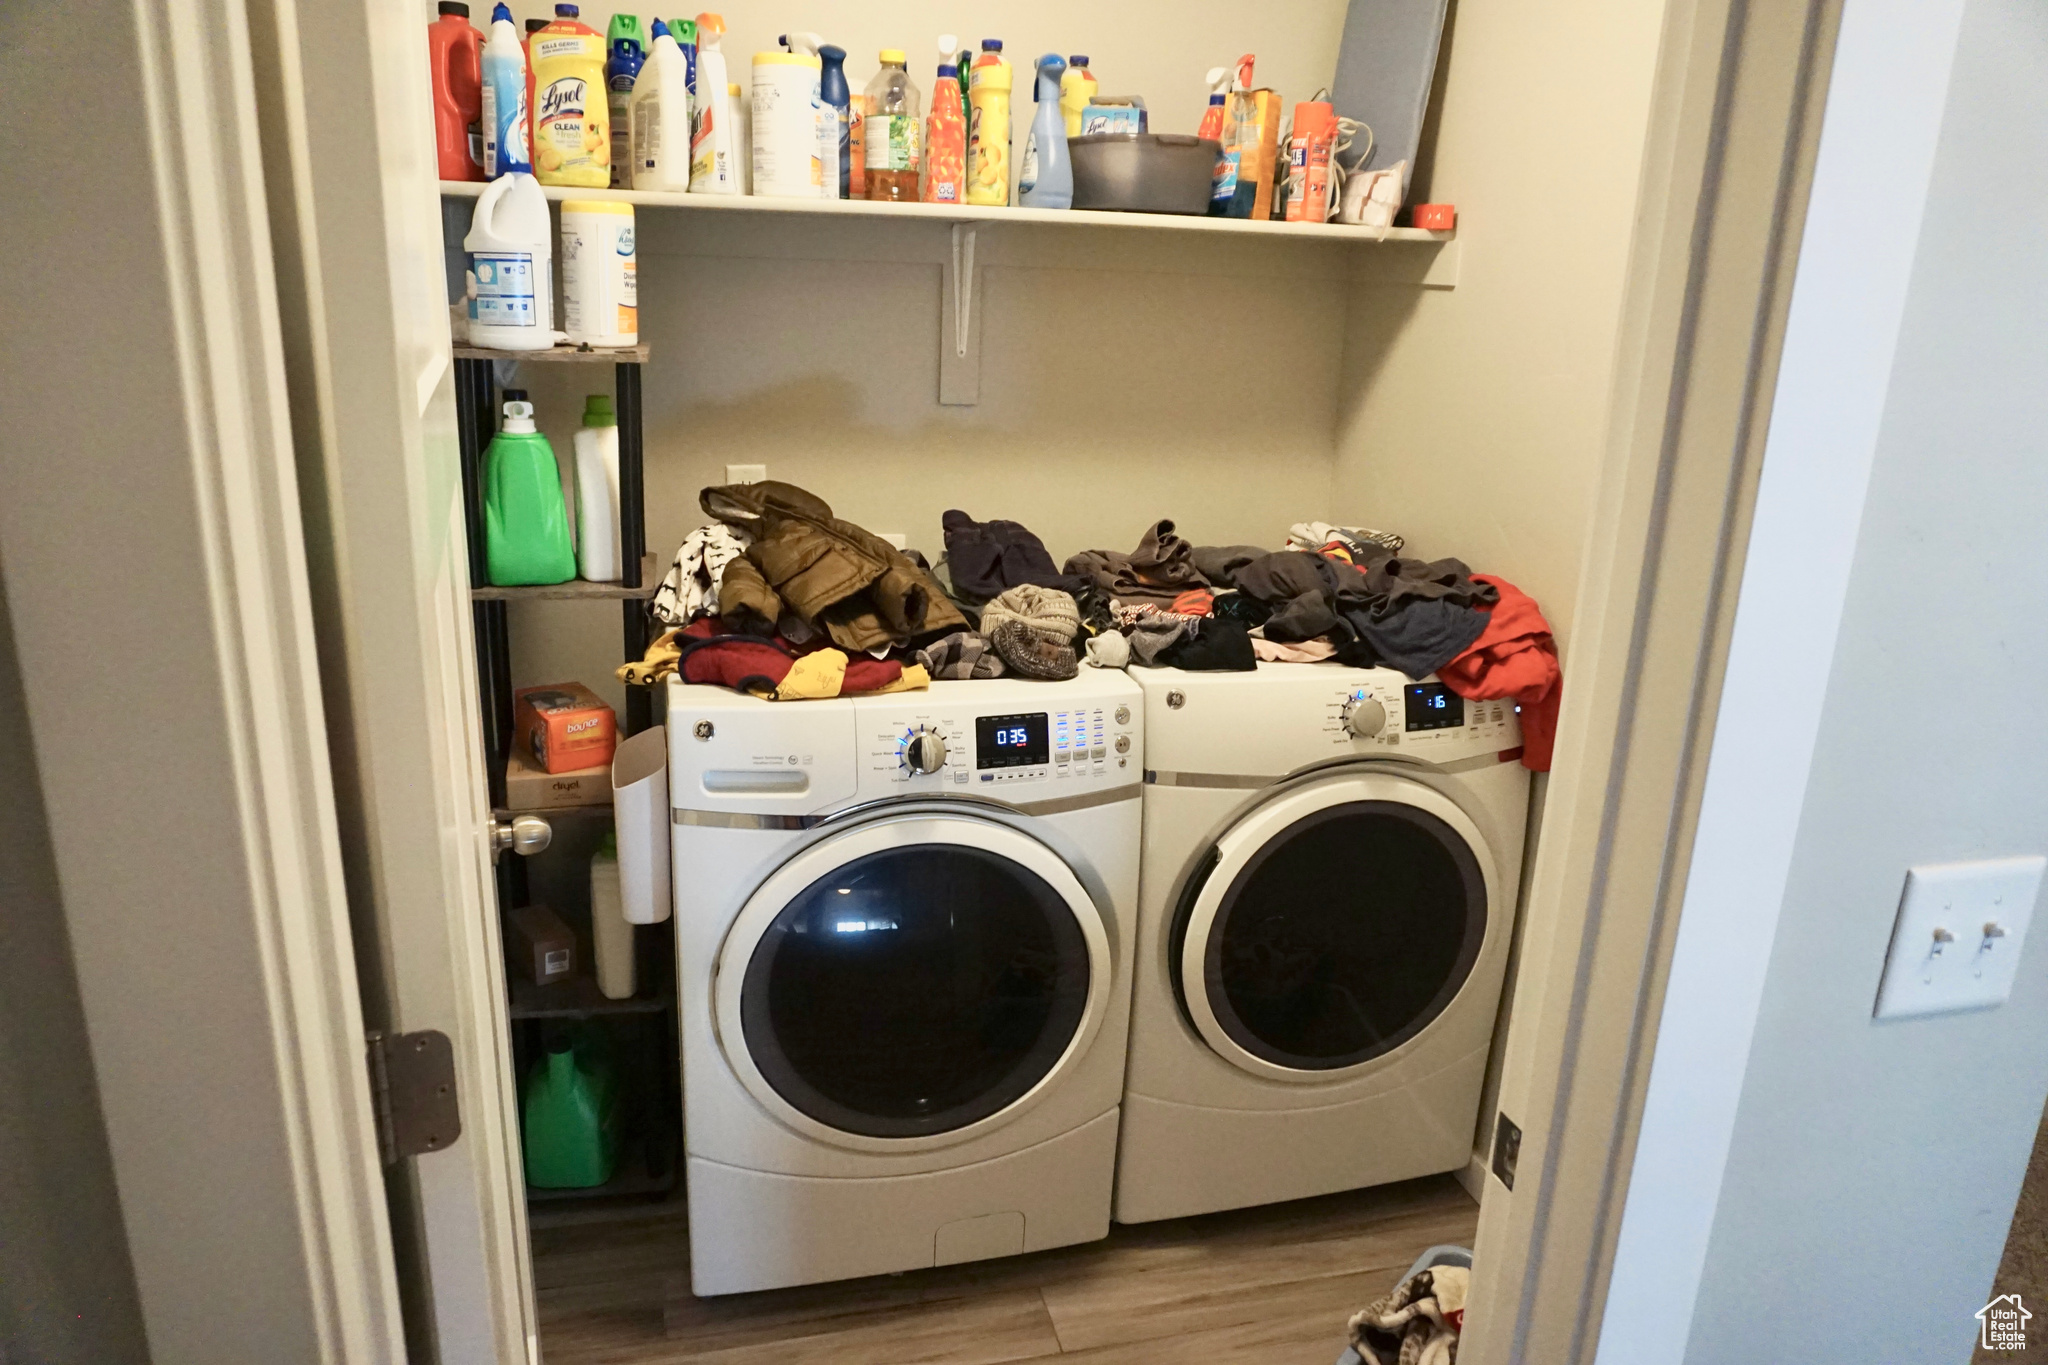 Clothes washing area with washing machine and dryer and tile flooring